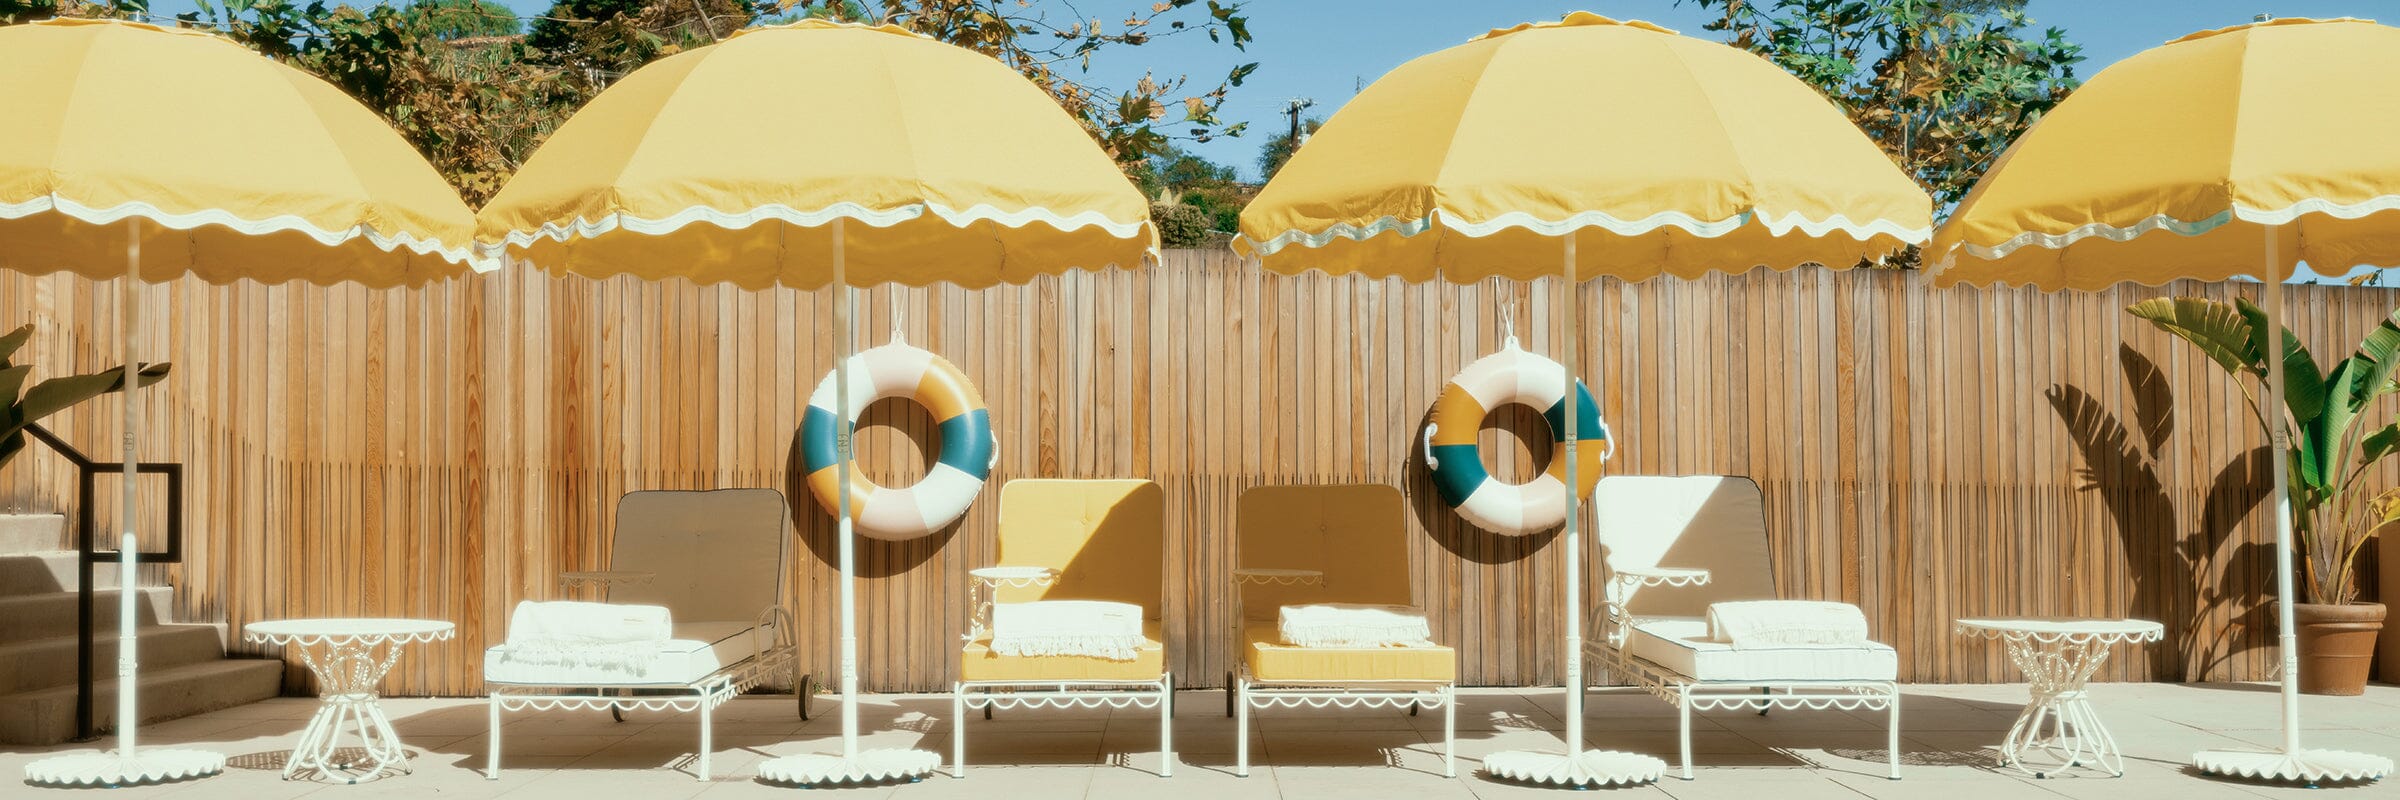 Yellow patio umbrellas by a poolside